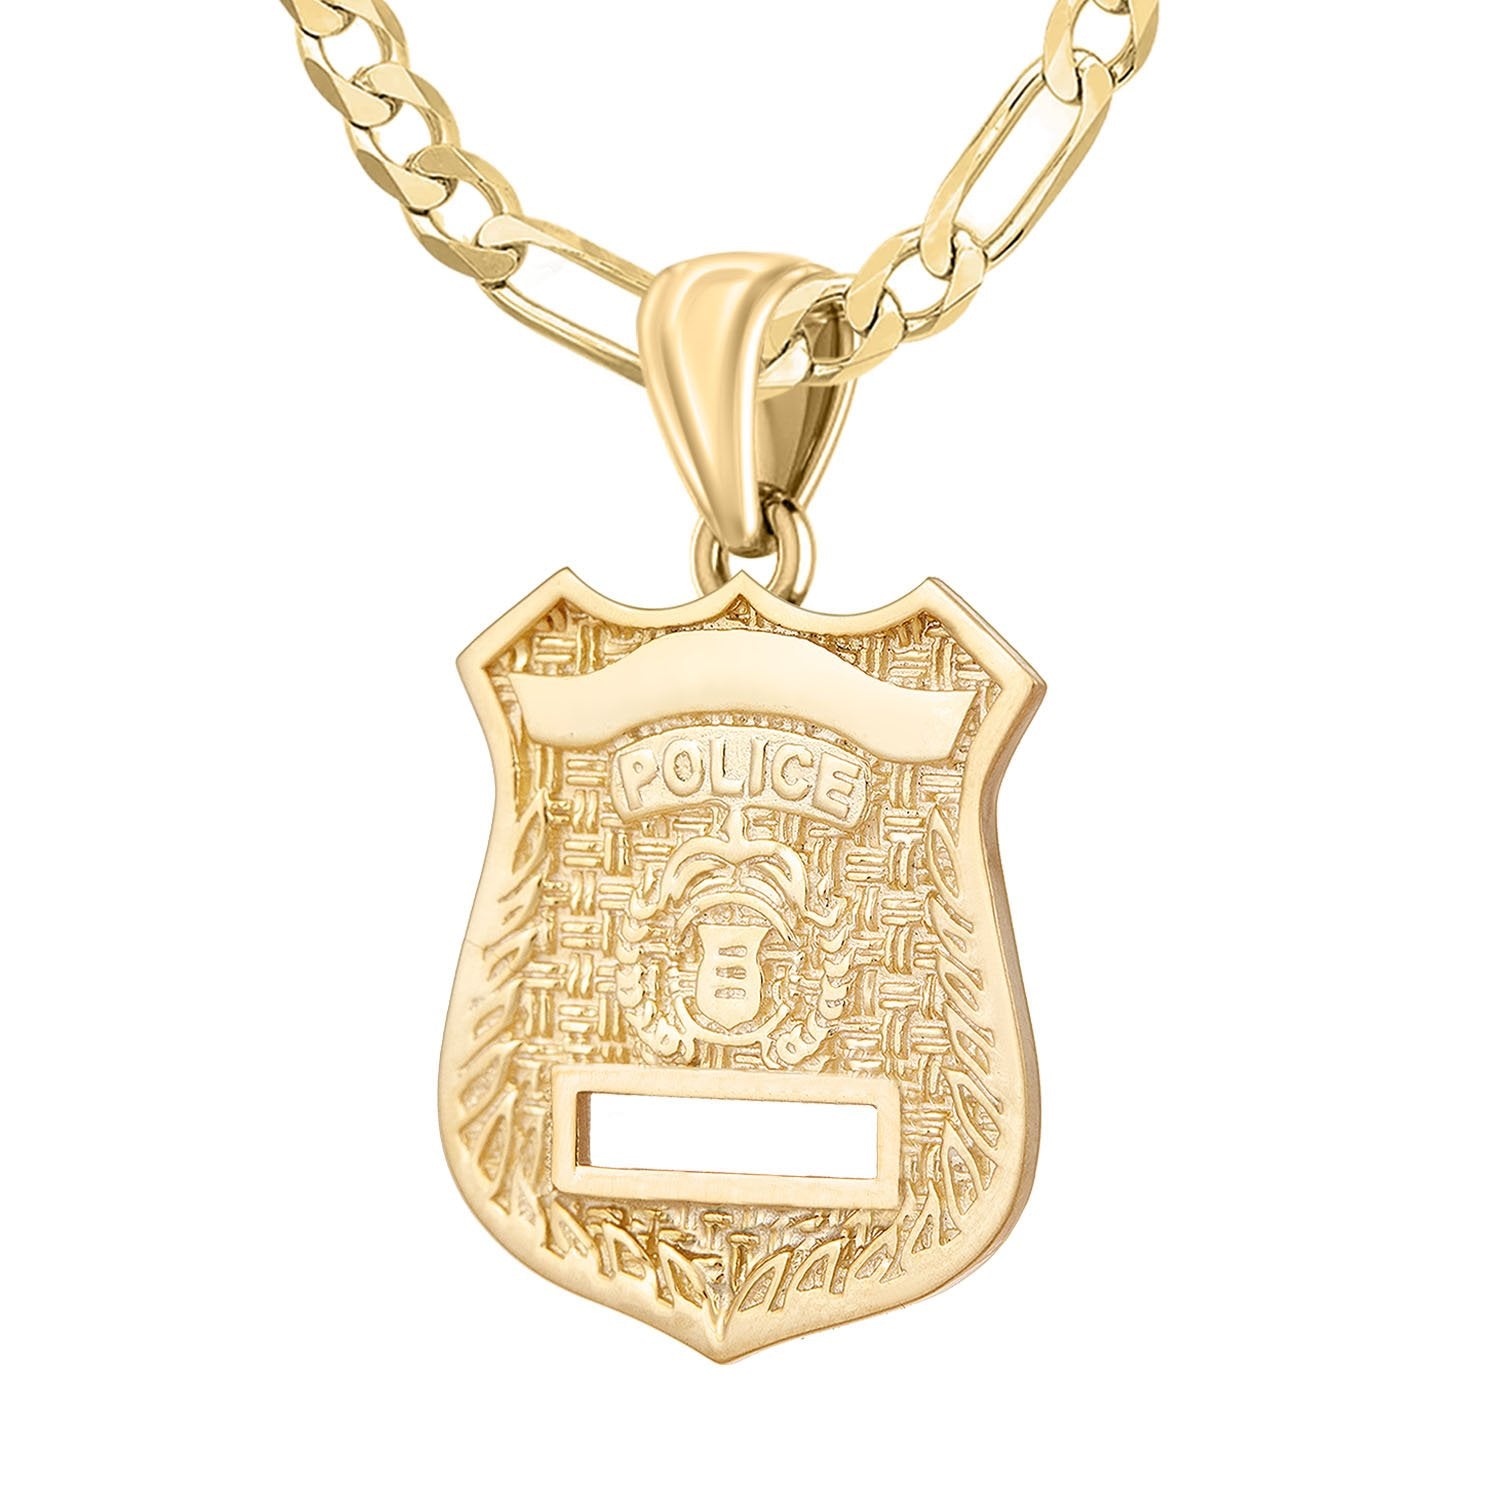 Police Badge Necklace In Gold of 26mm - 3.8mm Figaro Chain